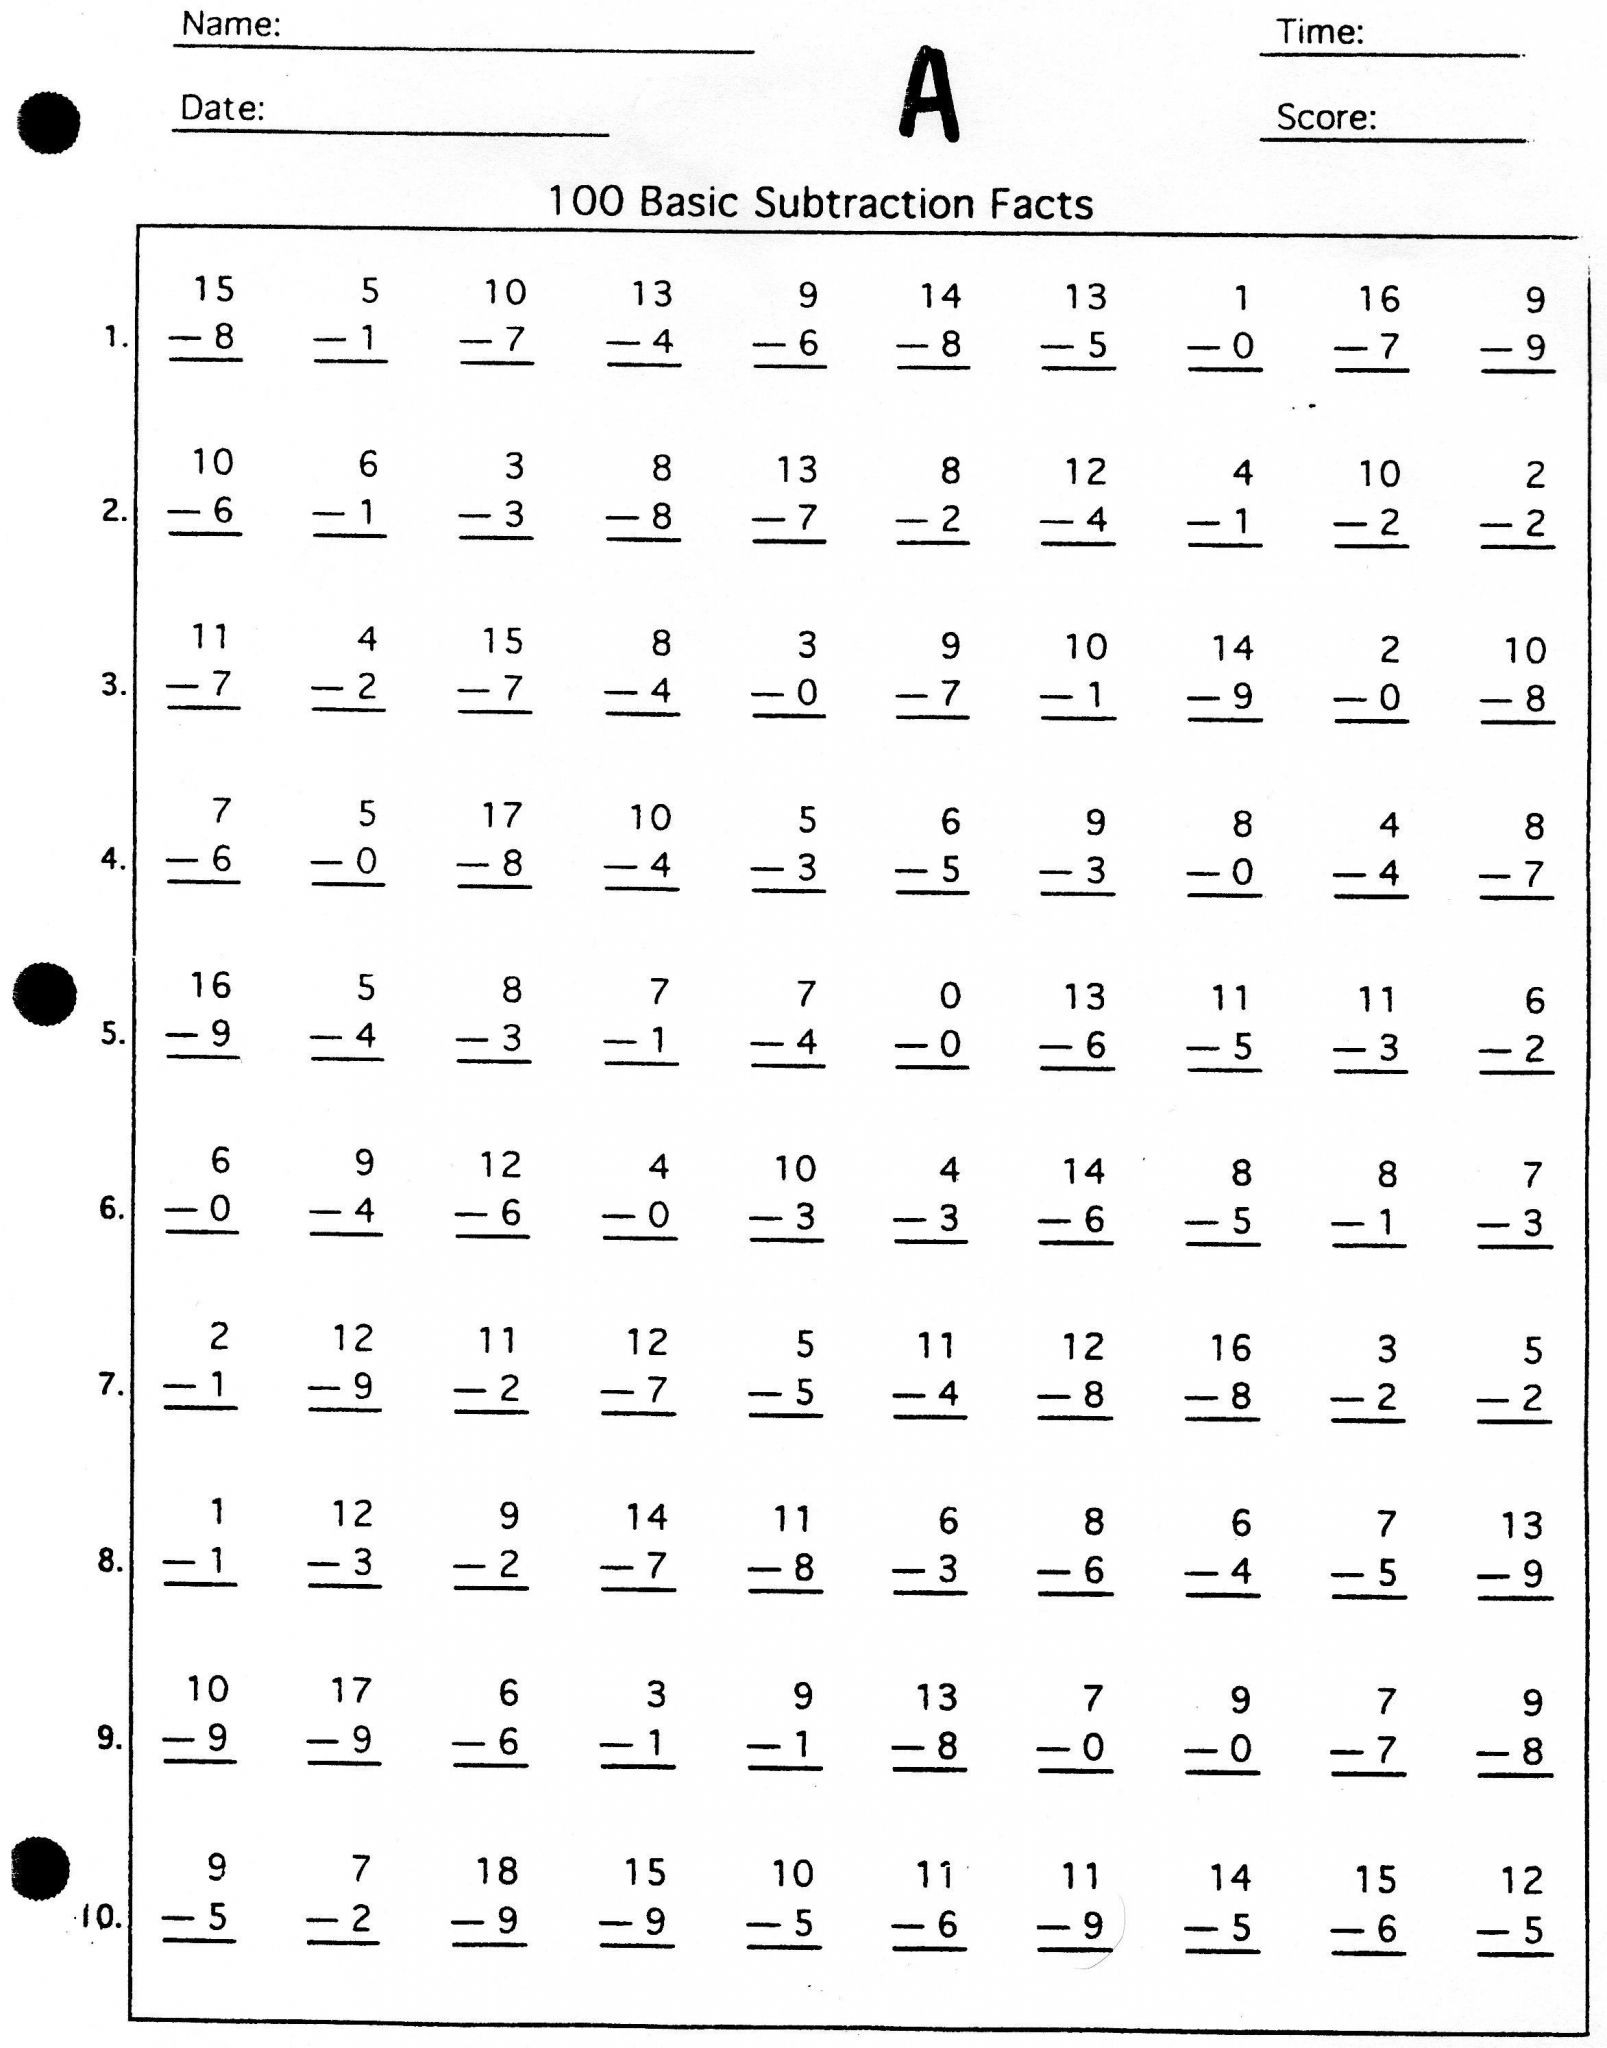 multiply-complex-numbers-worksheet-pdf-and-answer-key-28-scaffolded-questions-on-simplifying